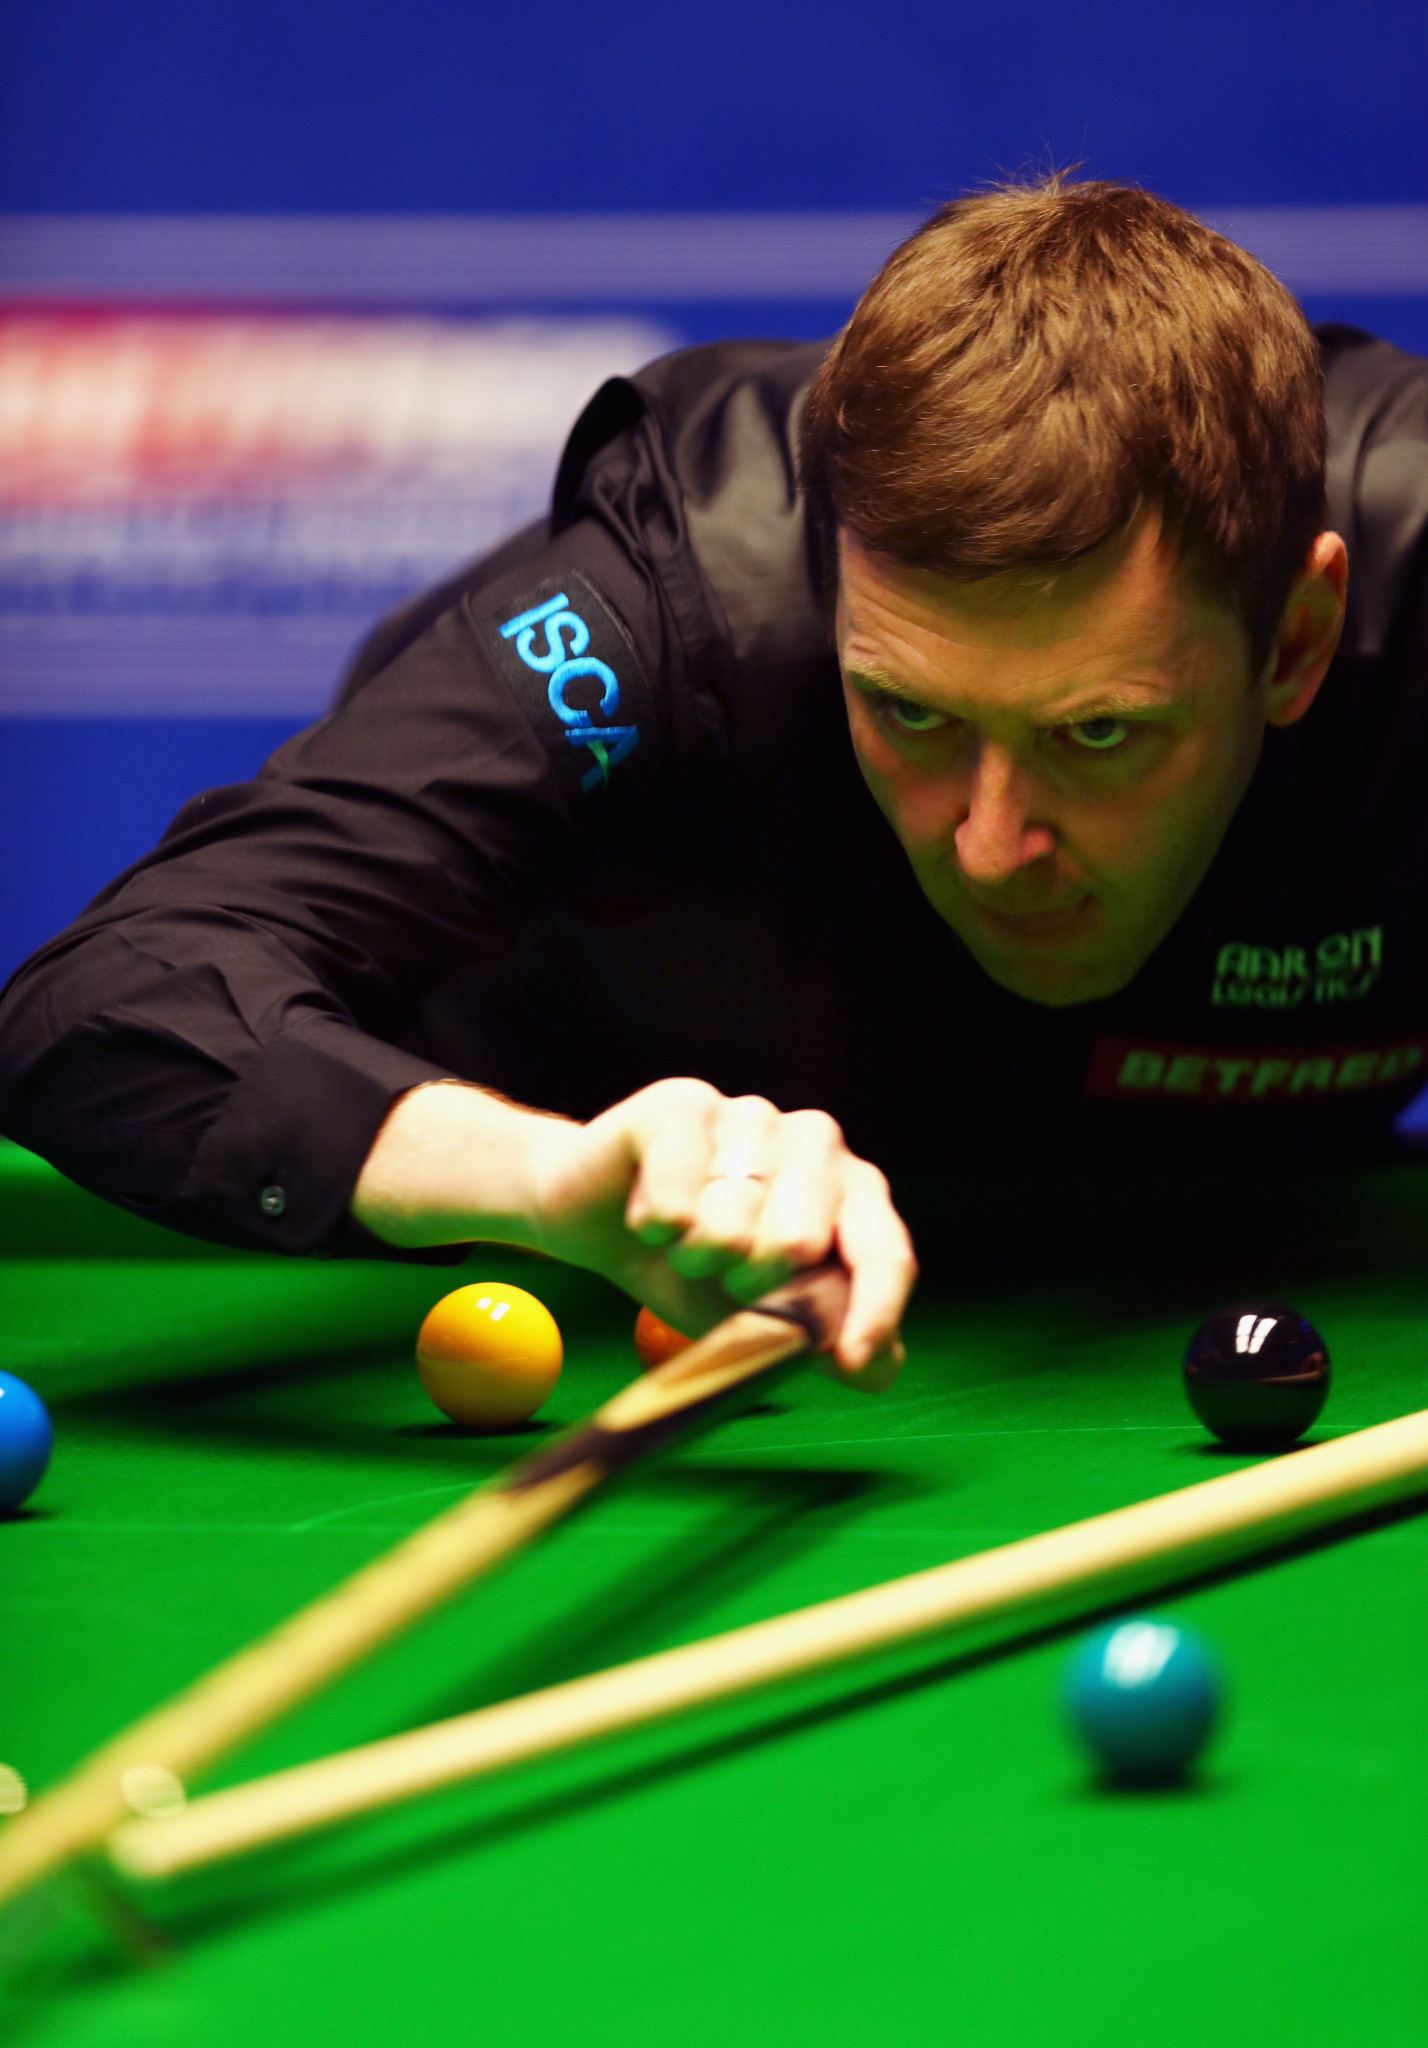 English qualifier Ricky Walden closed out a 10-6 first-round victory over Belgium's Luca Brecel ©Getty Images